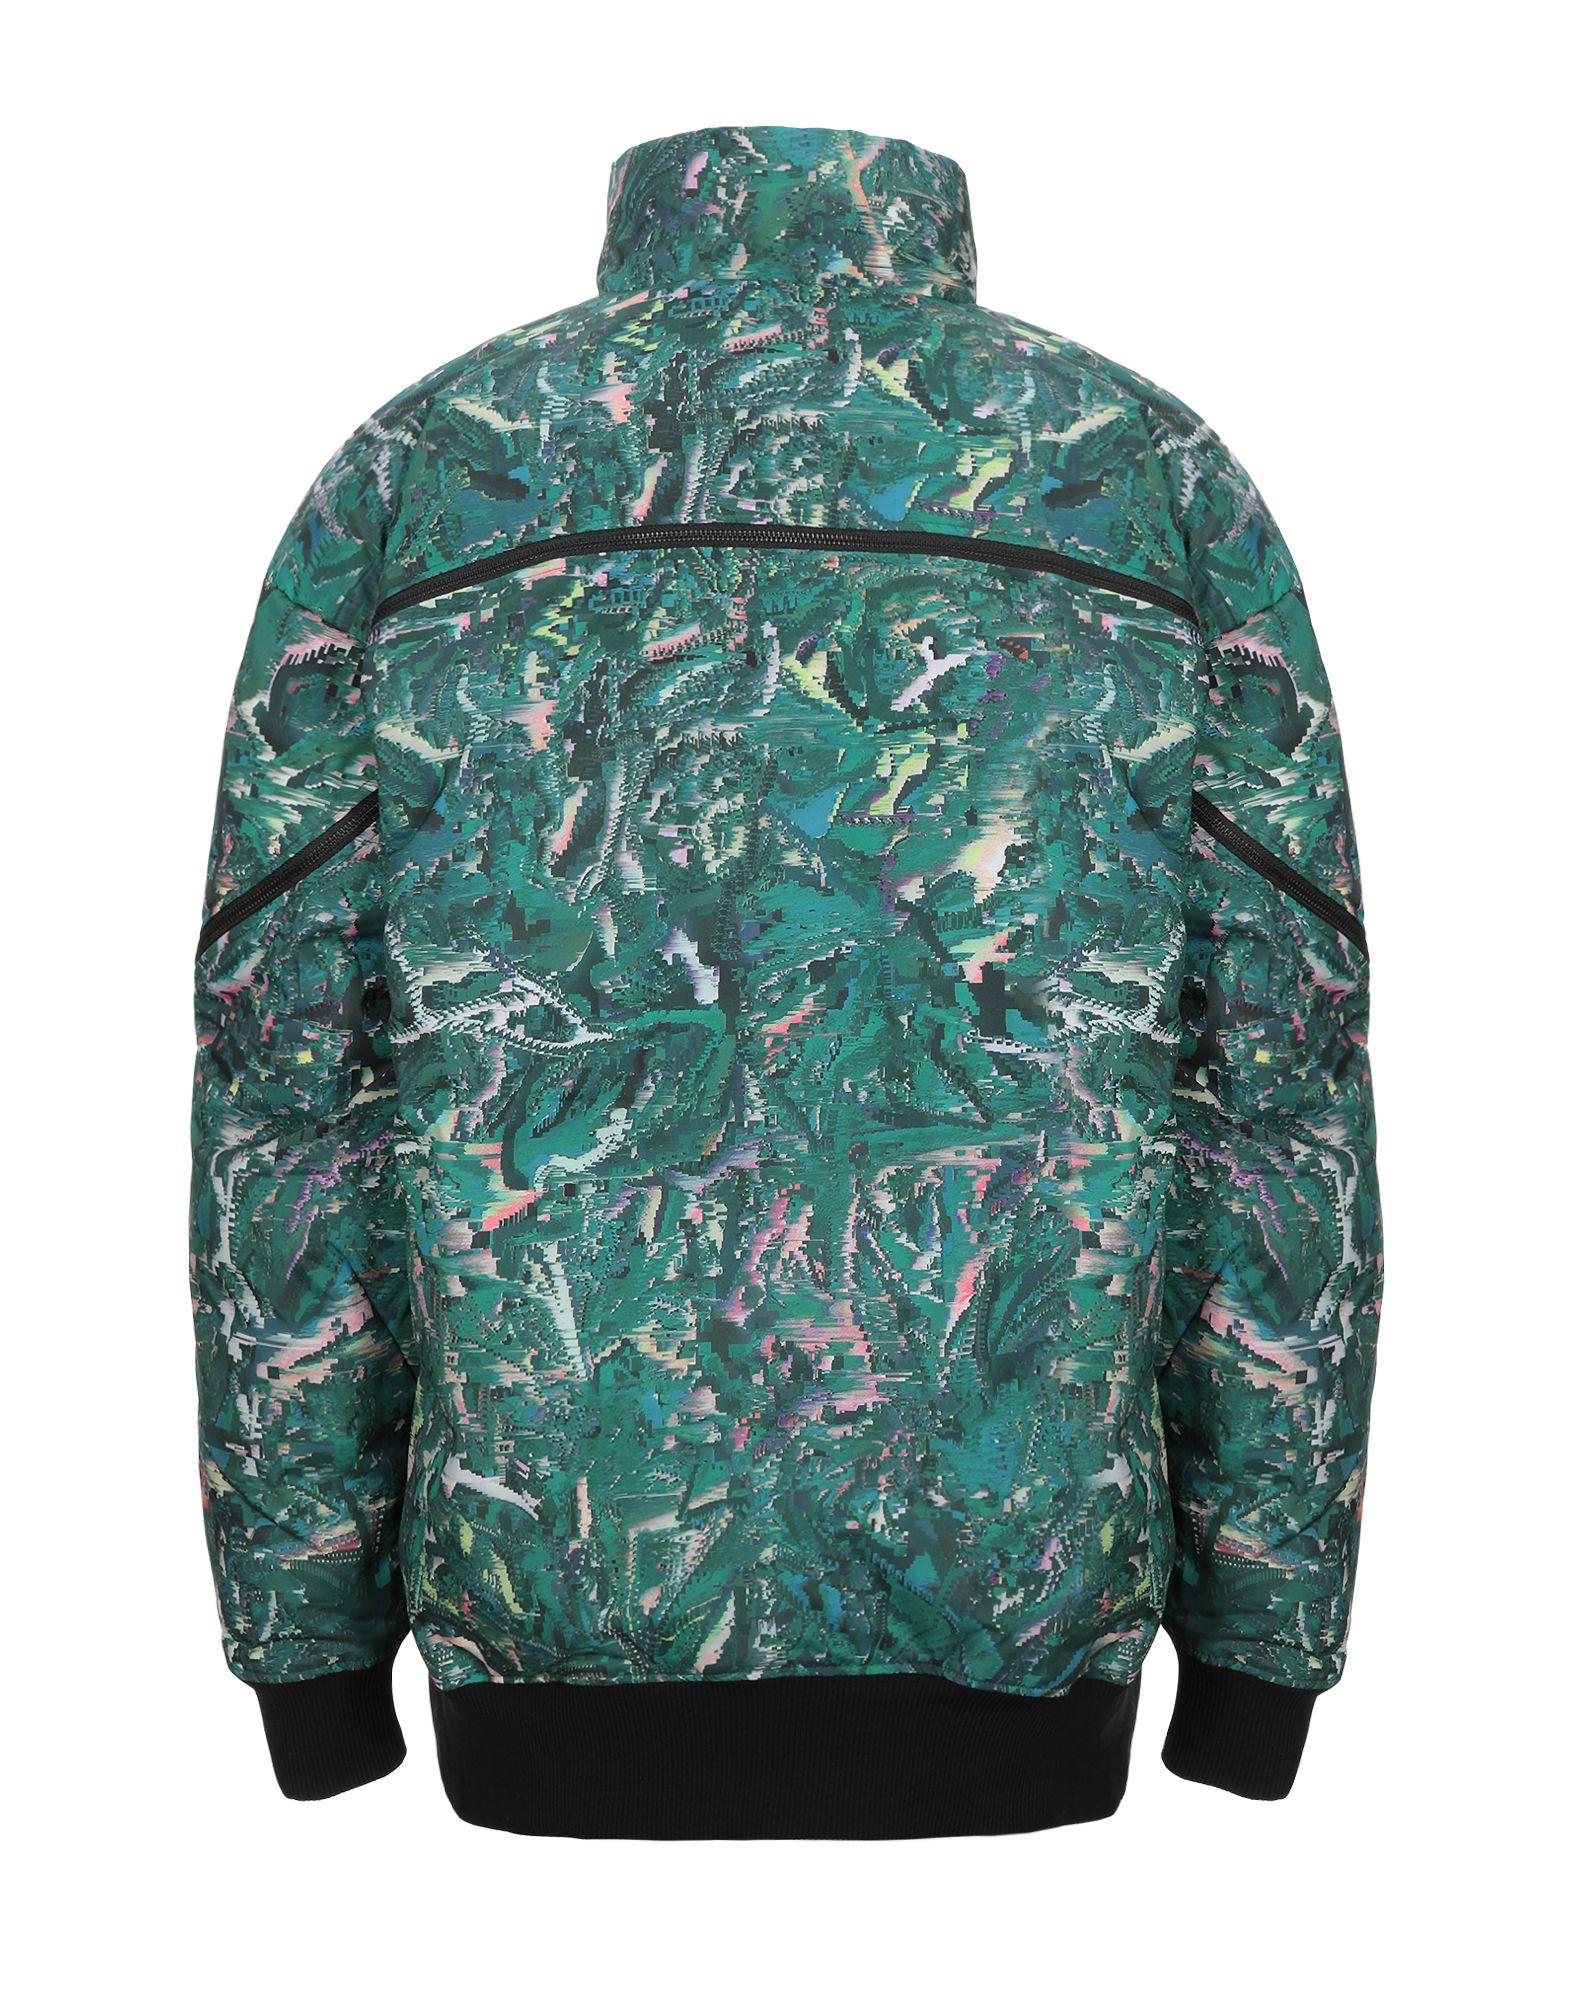 Y-3 Synthetic Down Jacket in Green for Men - Lyst